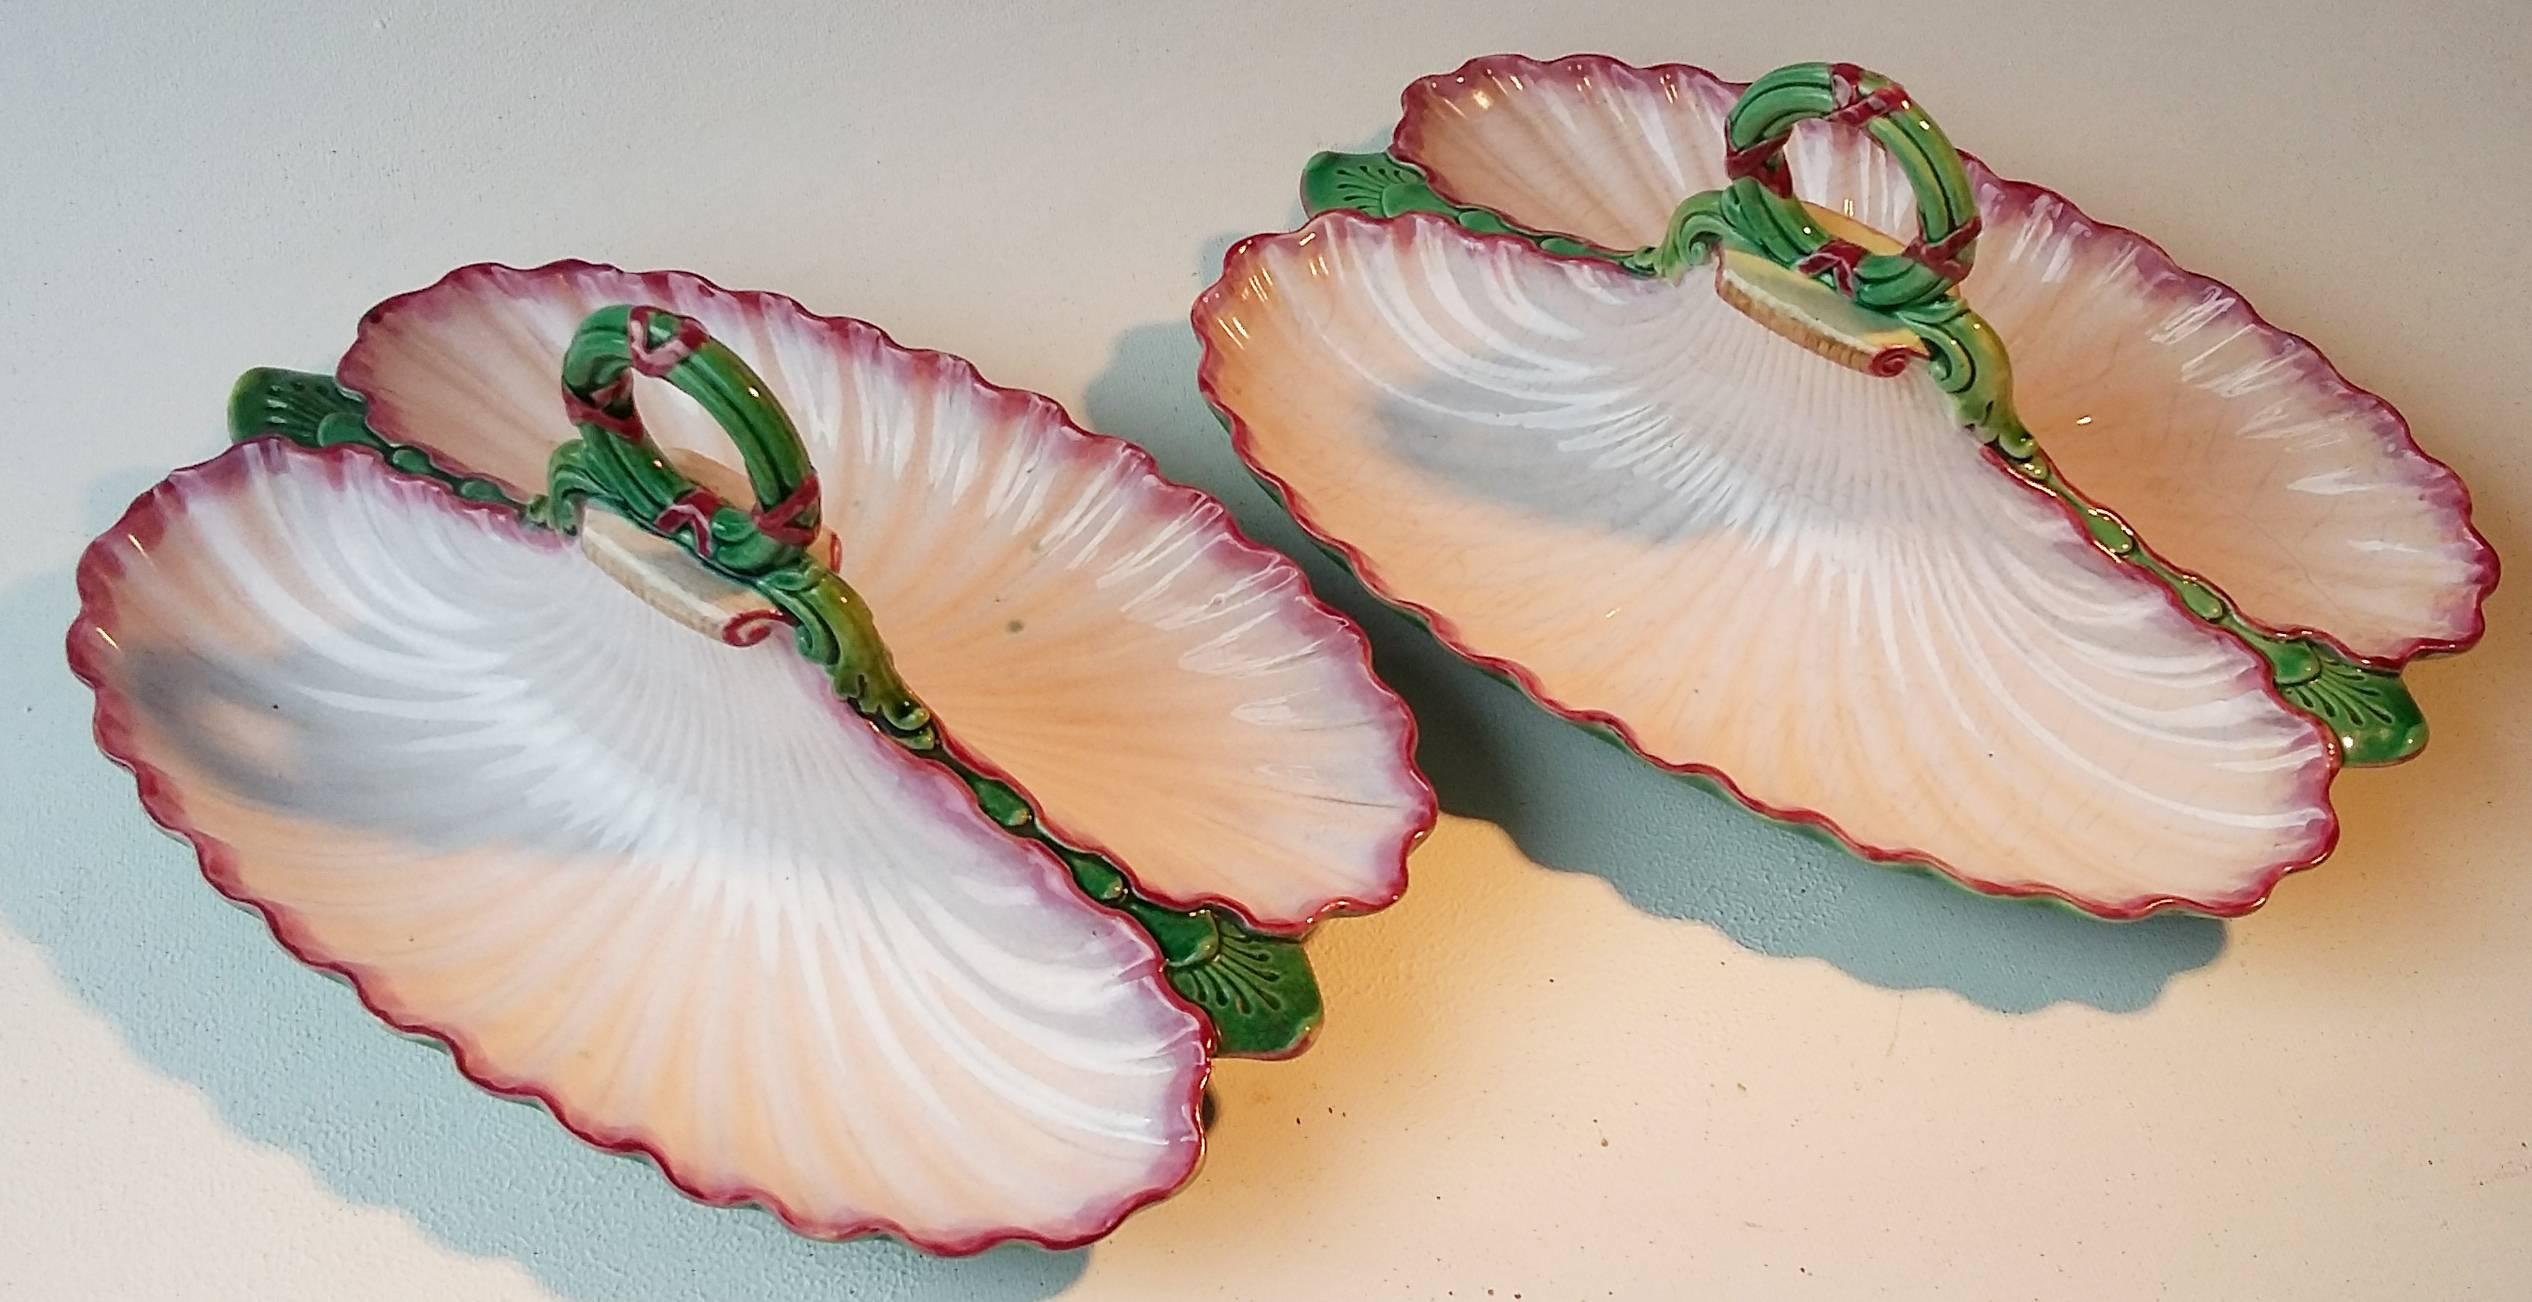 Rare and elegant pair of Victorian handled serving dishes signed Minton in the shape of two shells, the handle is decorated with a pink ribbon.